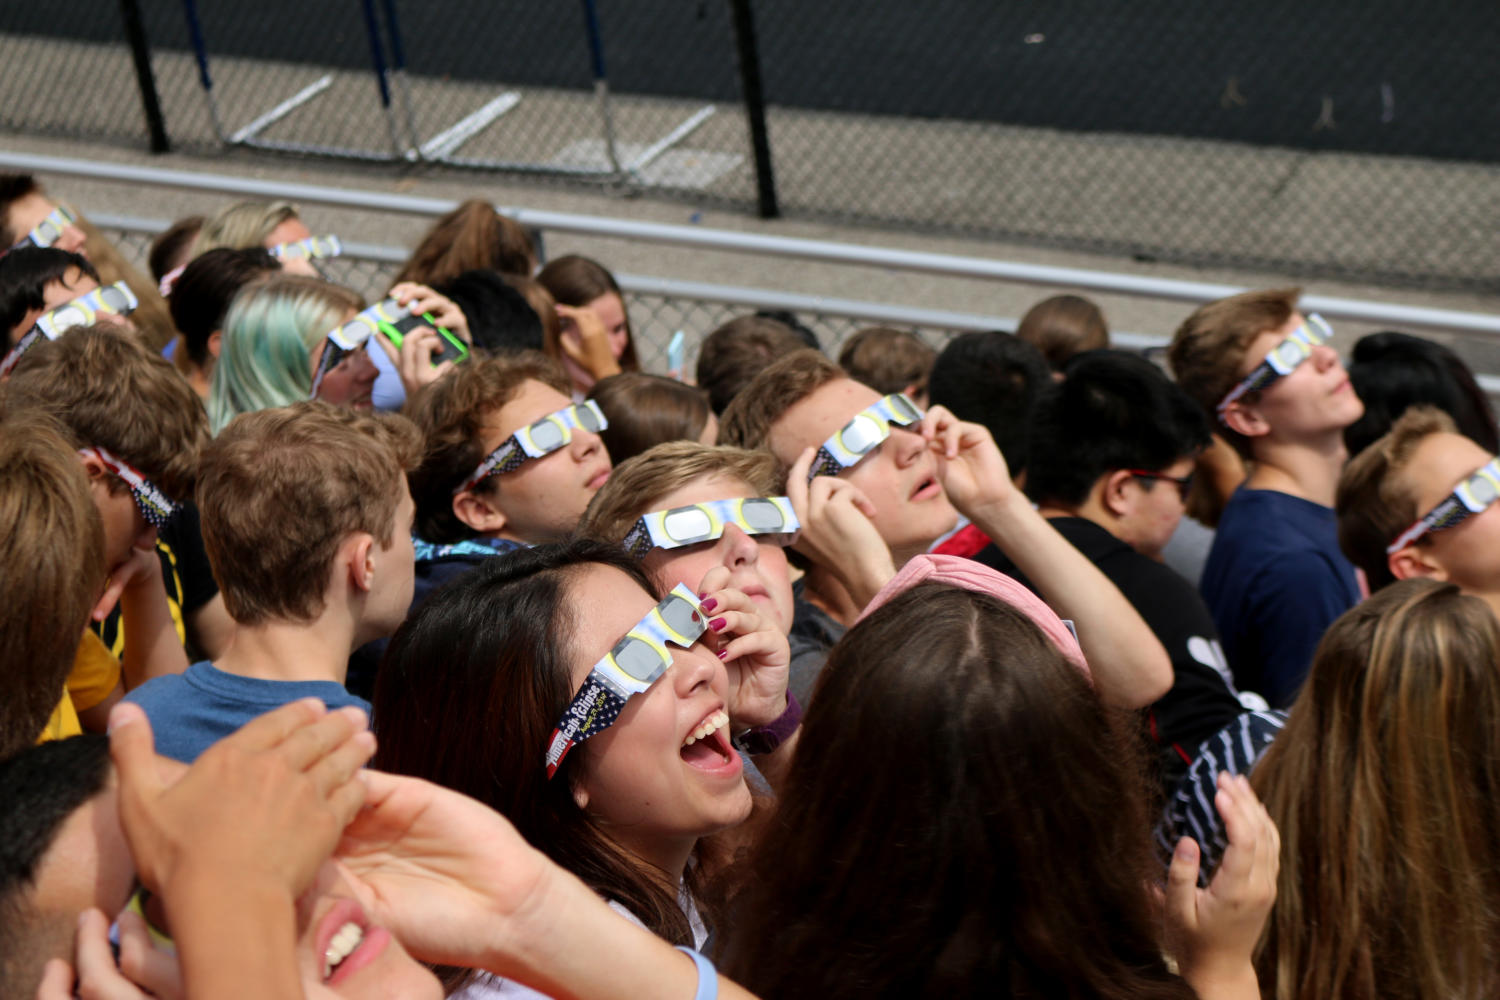 During the assembly, students look at the solar eclipse at the peak of its visibility from the football field. Many Naperville North High School students like senior Ben Benaitis had their expectations exceeded. “The fact that we were in school unexpectedly made the experience a lot better. I got to be with my friends the whole time and I definitely wouldnt have gone out and gotten the glasses on my own,” Benaitis said.
